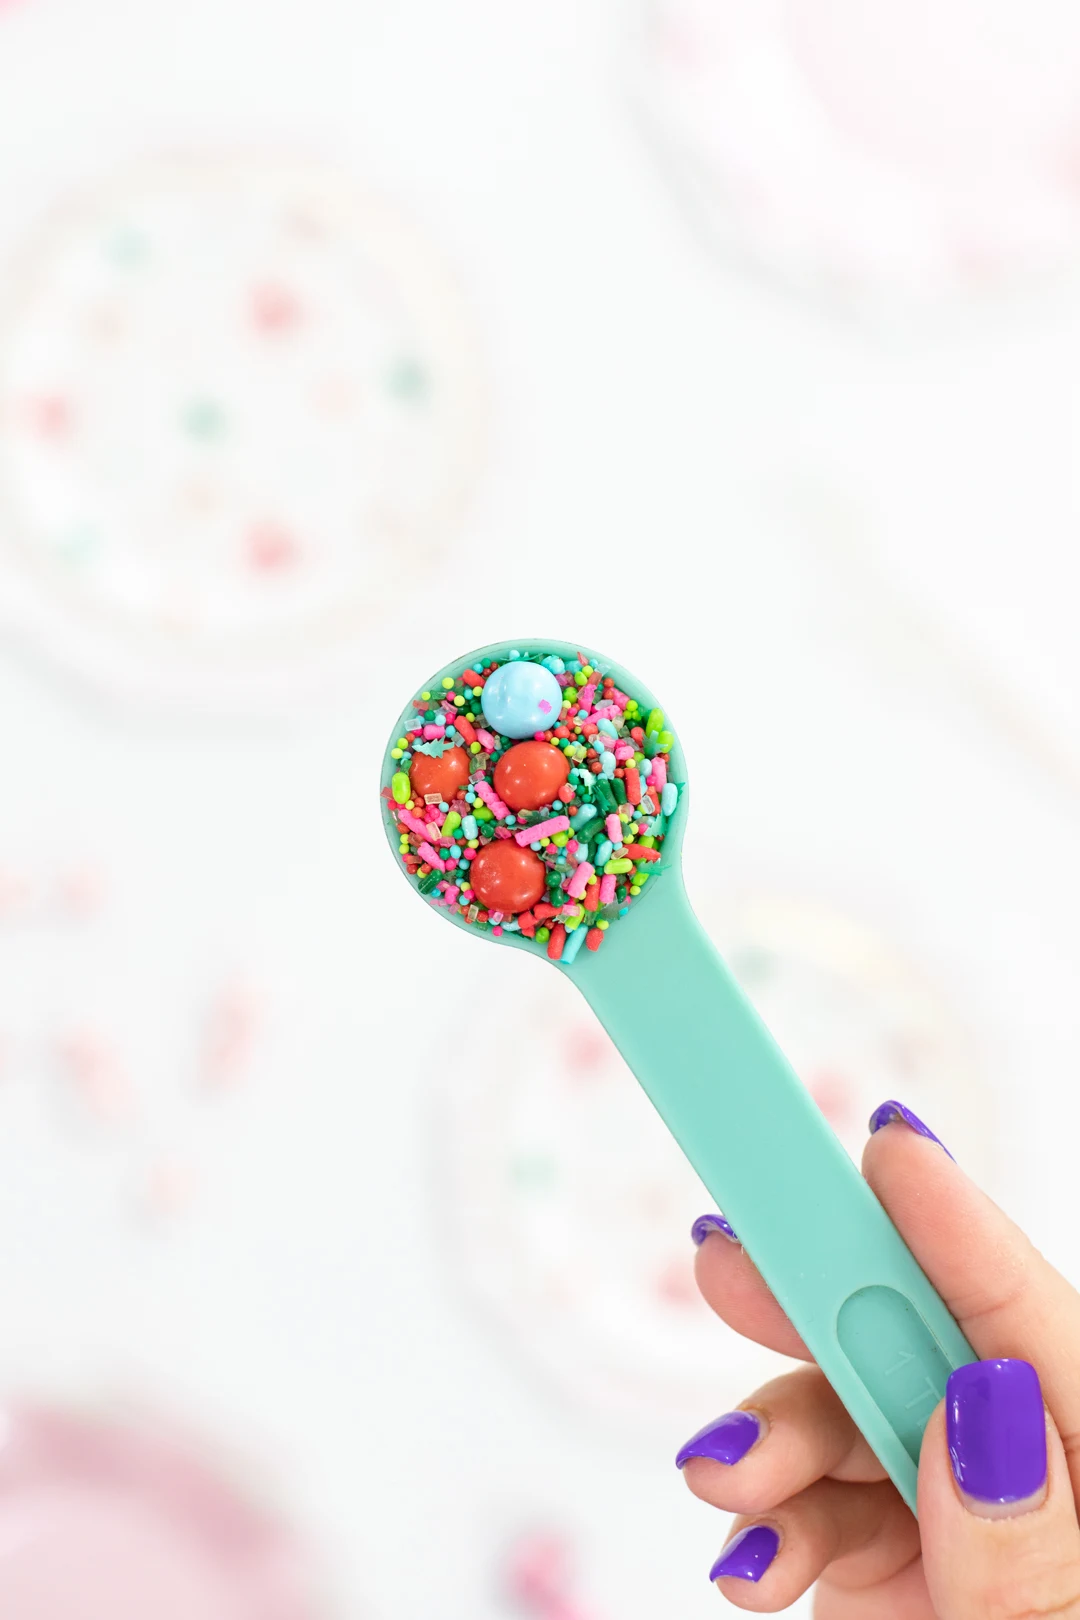 Pretty Unique Sprinkles with fun colors like pink, red and teal. Whoville inspired.